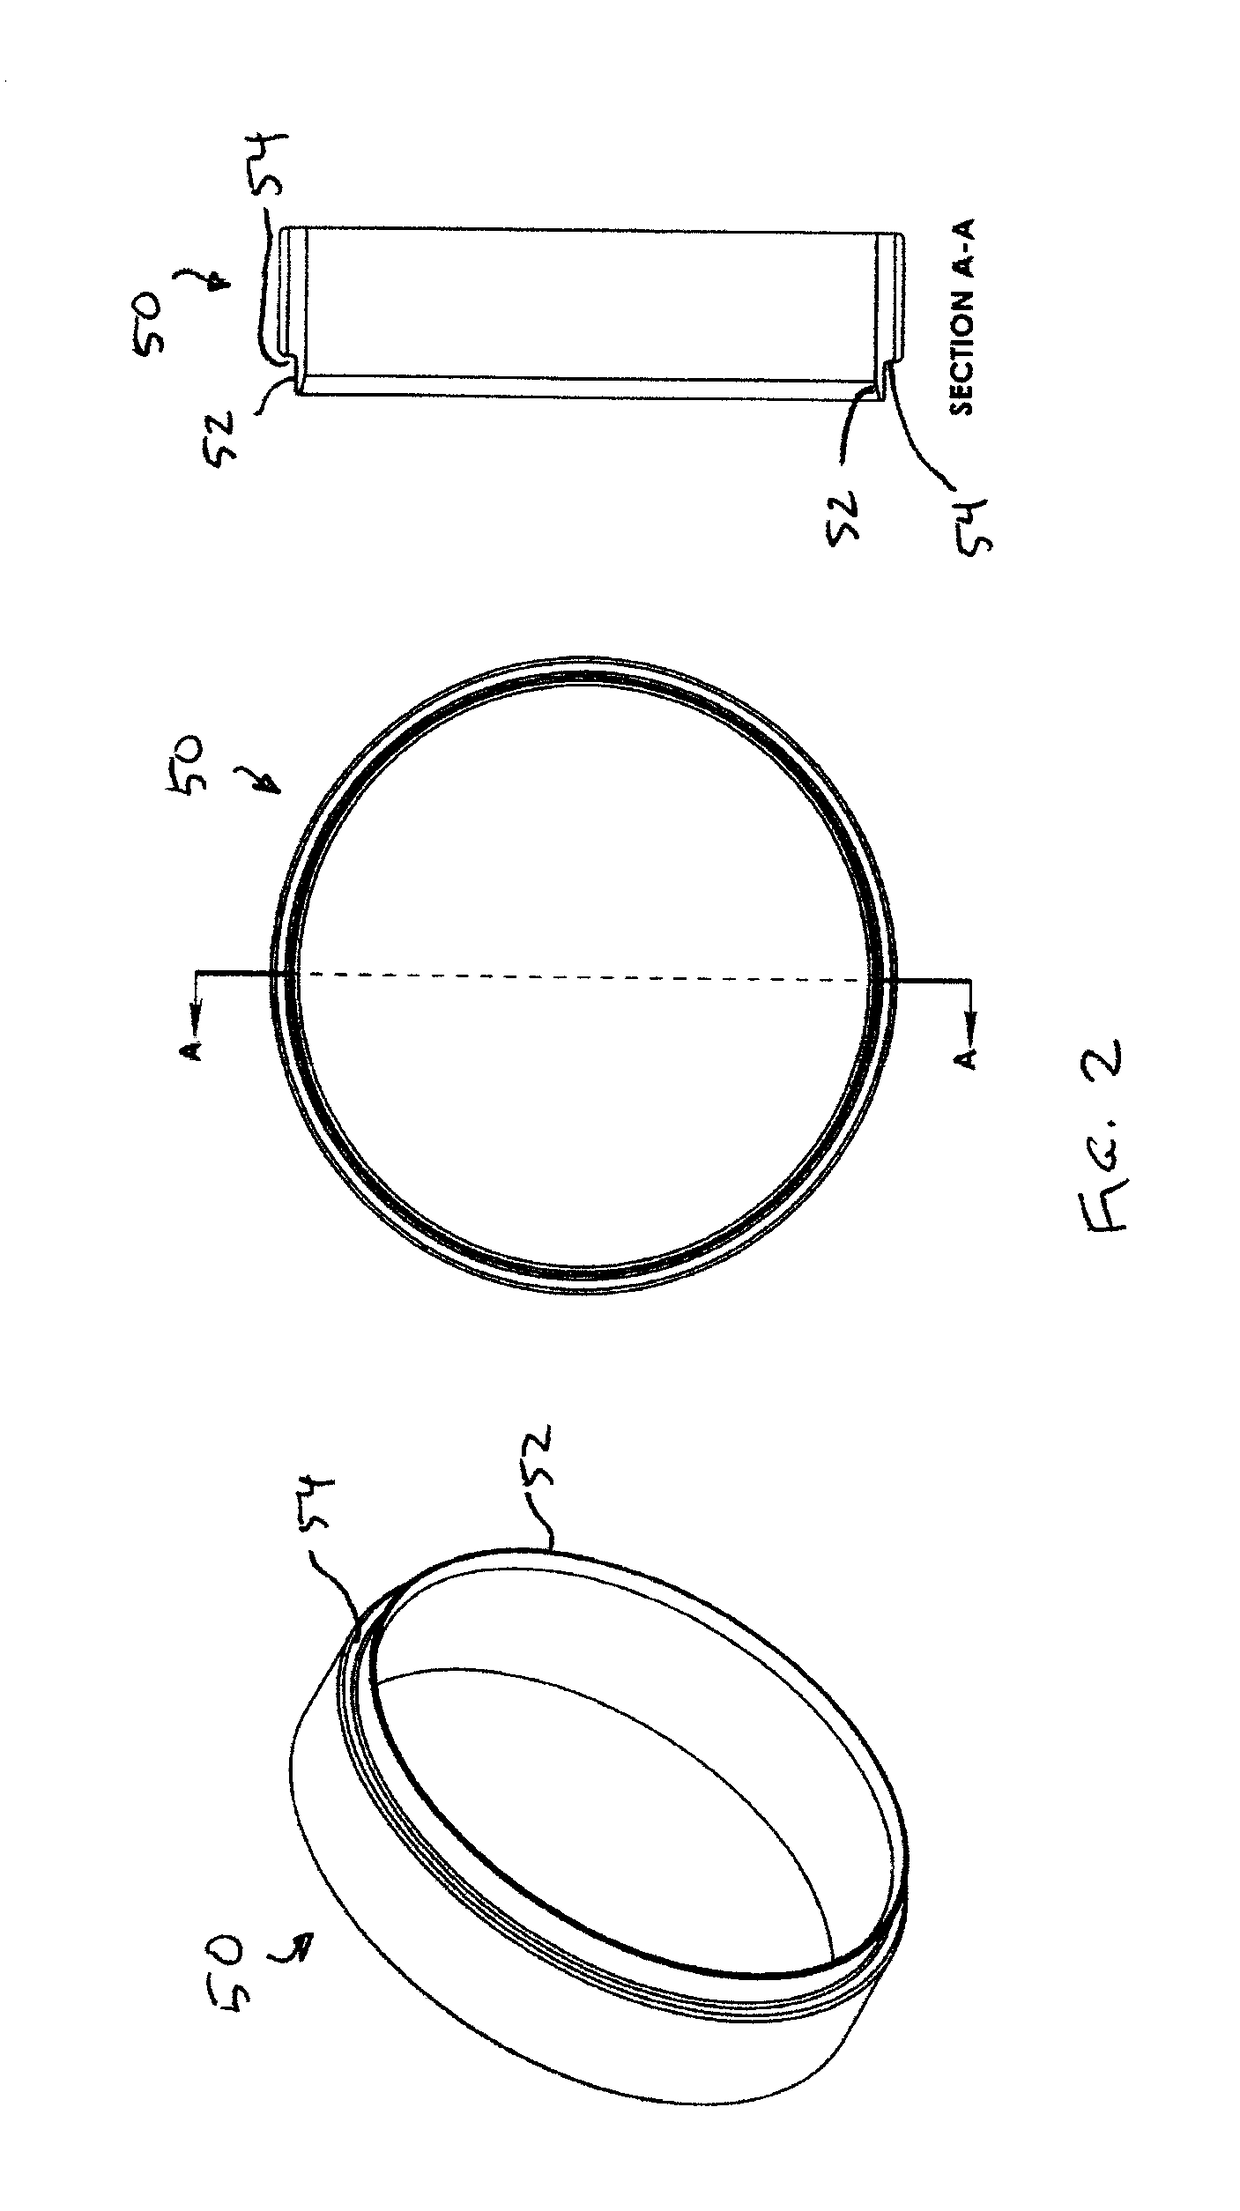 Device and method for securing conduit interior wear sleeve